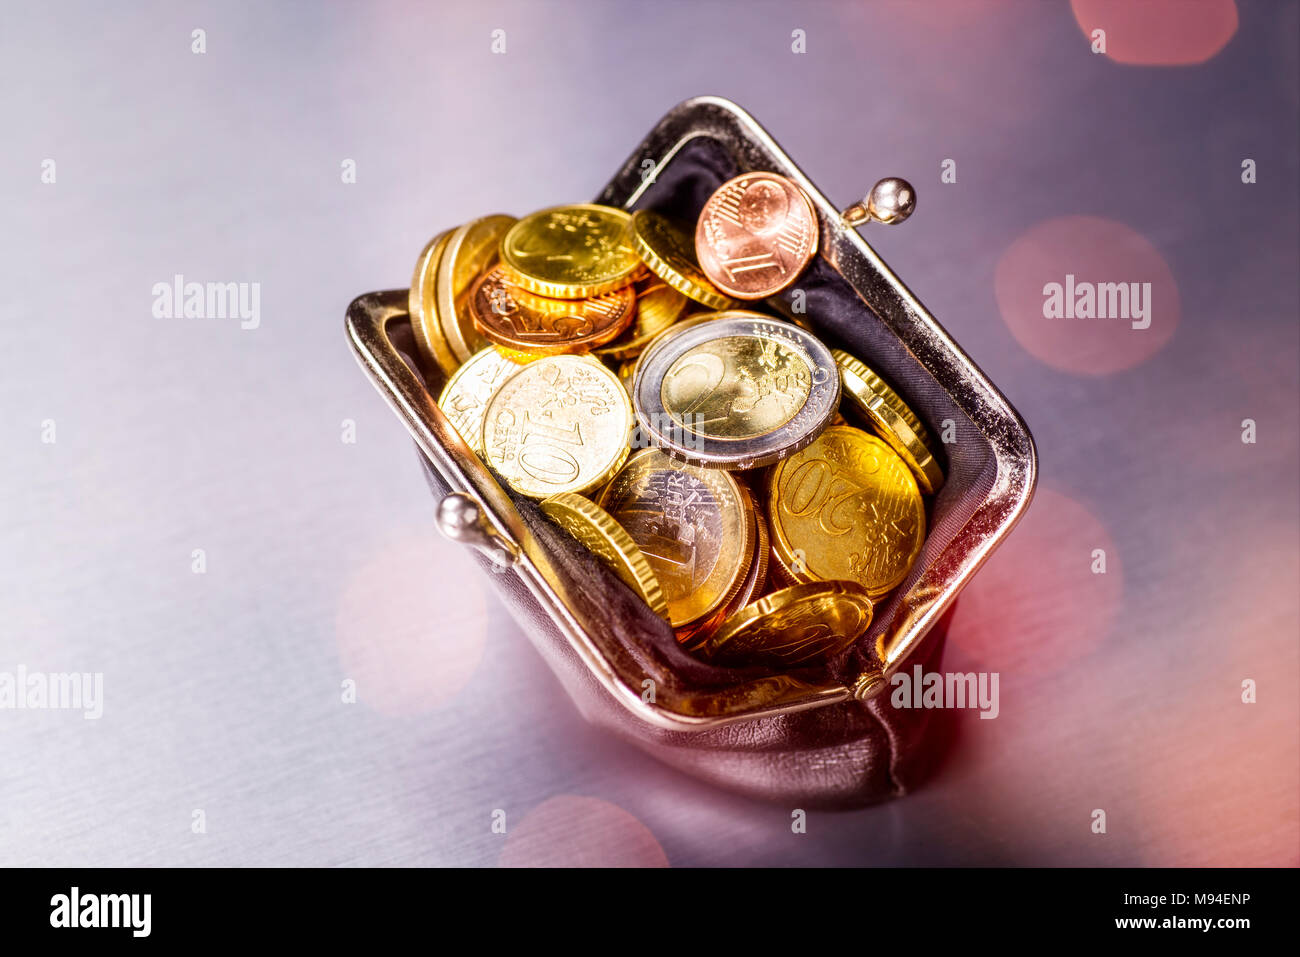 Wallet filled with many coins Stock Photo